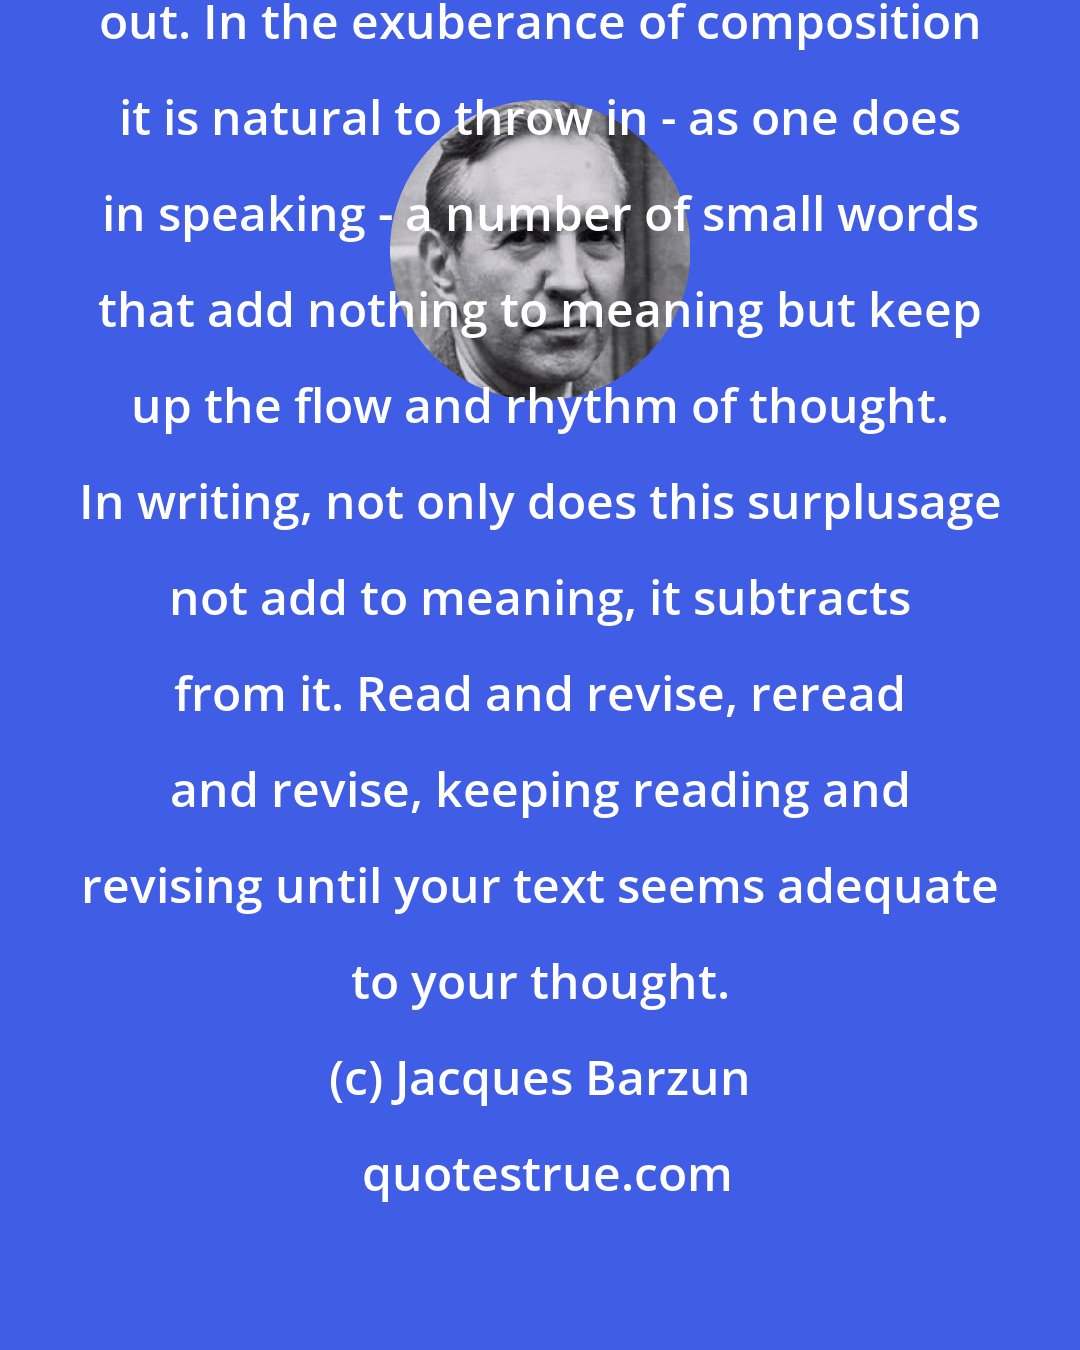 Jacques Barzun: One great aim of revision is to cut out. In the exuberance of composition it is natural to throw in - as one does in speaking - a number of small words that add nothing to meaning but keep up the flow and rhythm of thought. In writing, not only does this surplusage not add to meaning, it subtracts from it. Read and revise, reread and revise, keeping reading and revising until your text seems adequate to your thought.